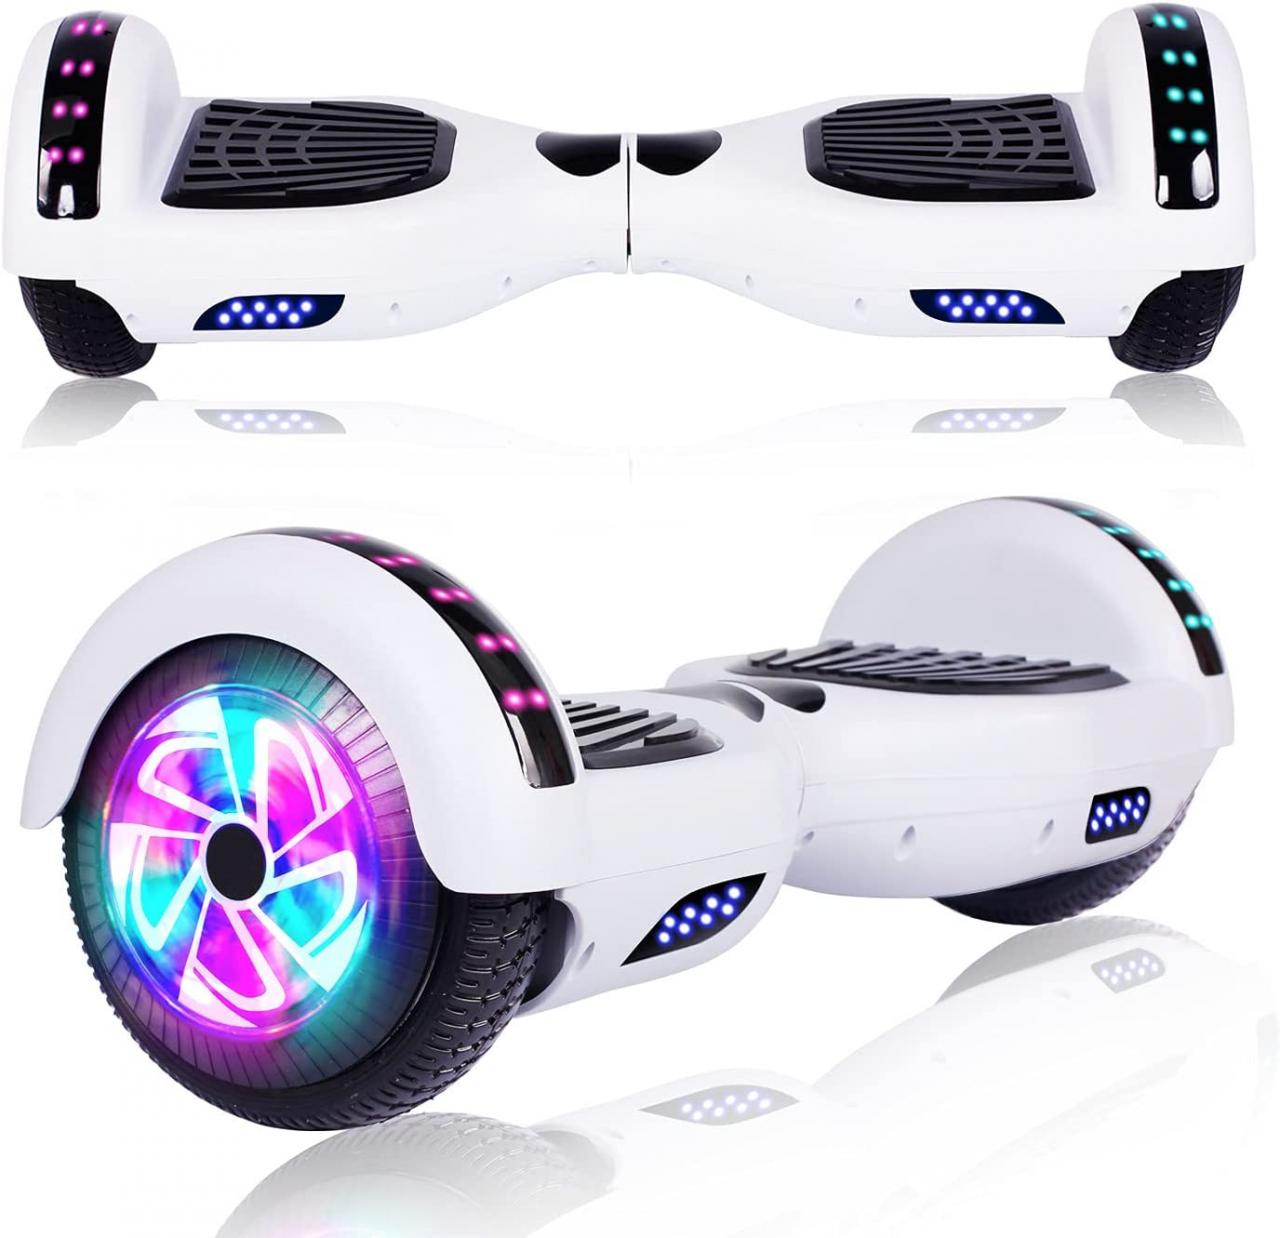 Buy UNI-SUN Hoverboard for Kids, Self Balancing Scooter 6.5 Two-Wheel Self  Balancing Hoverboards with Bluetooth and Lights Online in Vietnam.  B07M8XS9F5